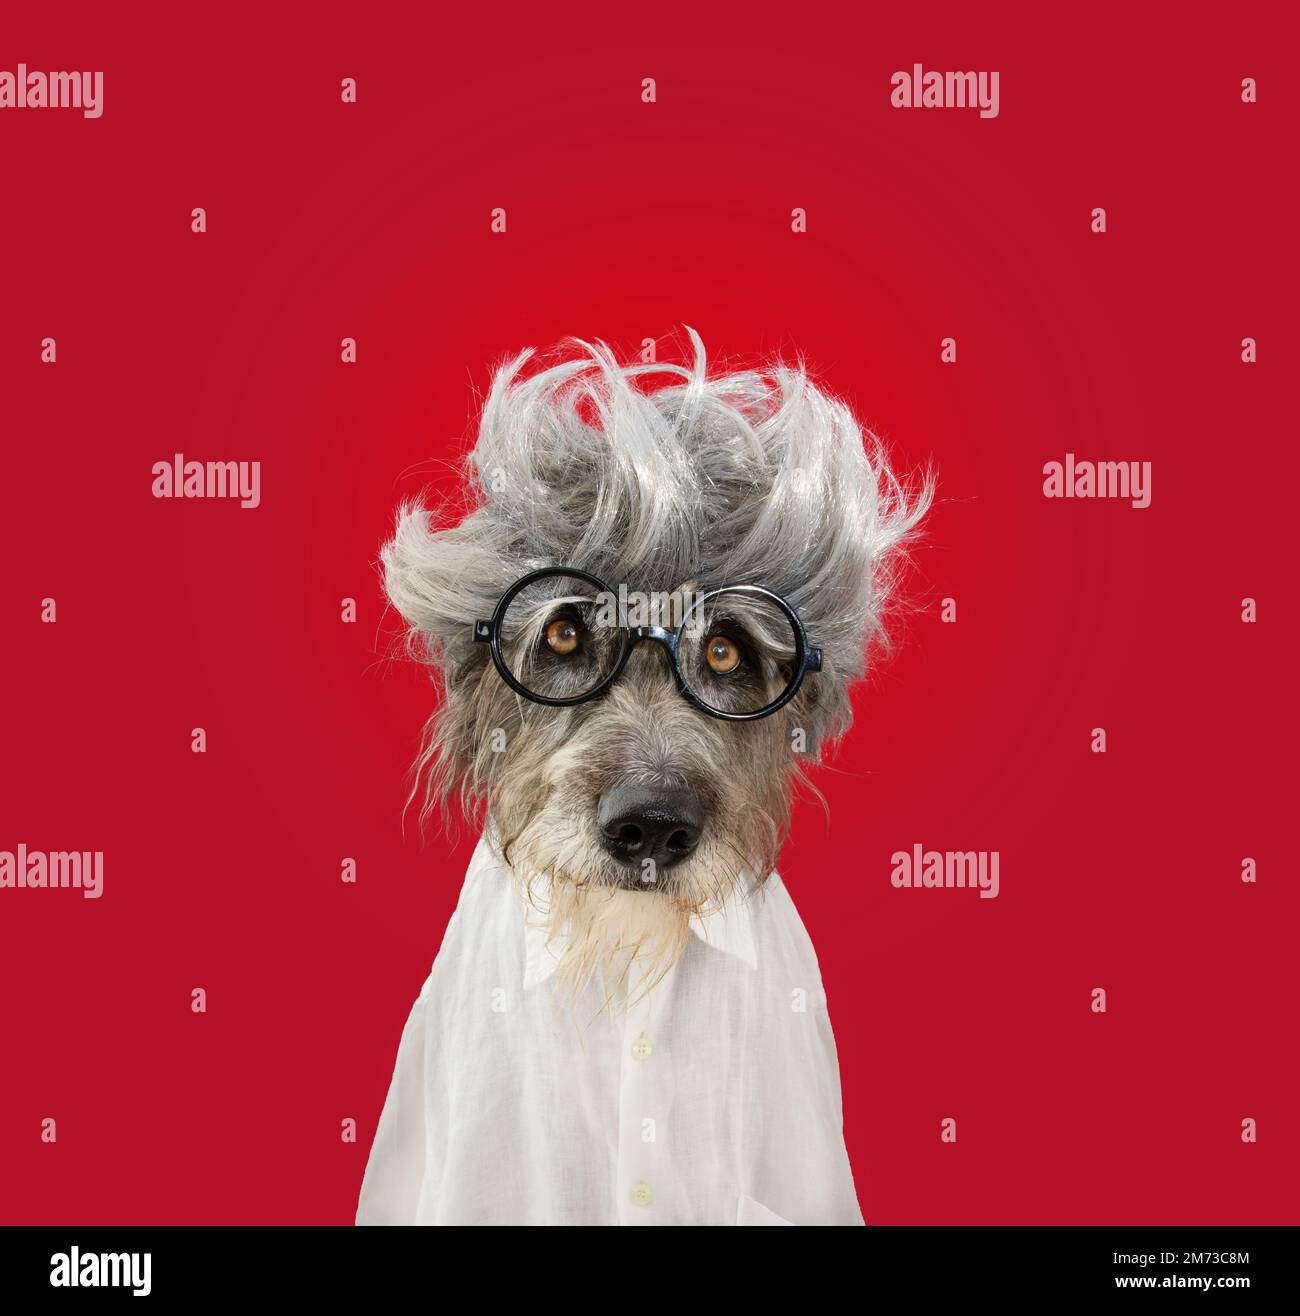 Portrait funny dog dressed as Albert Einstein celebrating carnival, halloween, new year with a wig costume and glasses. Isolated on red magenta backgr Stock Photo